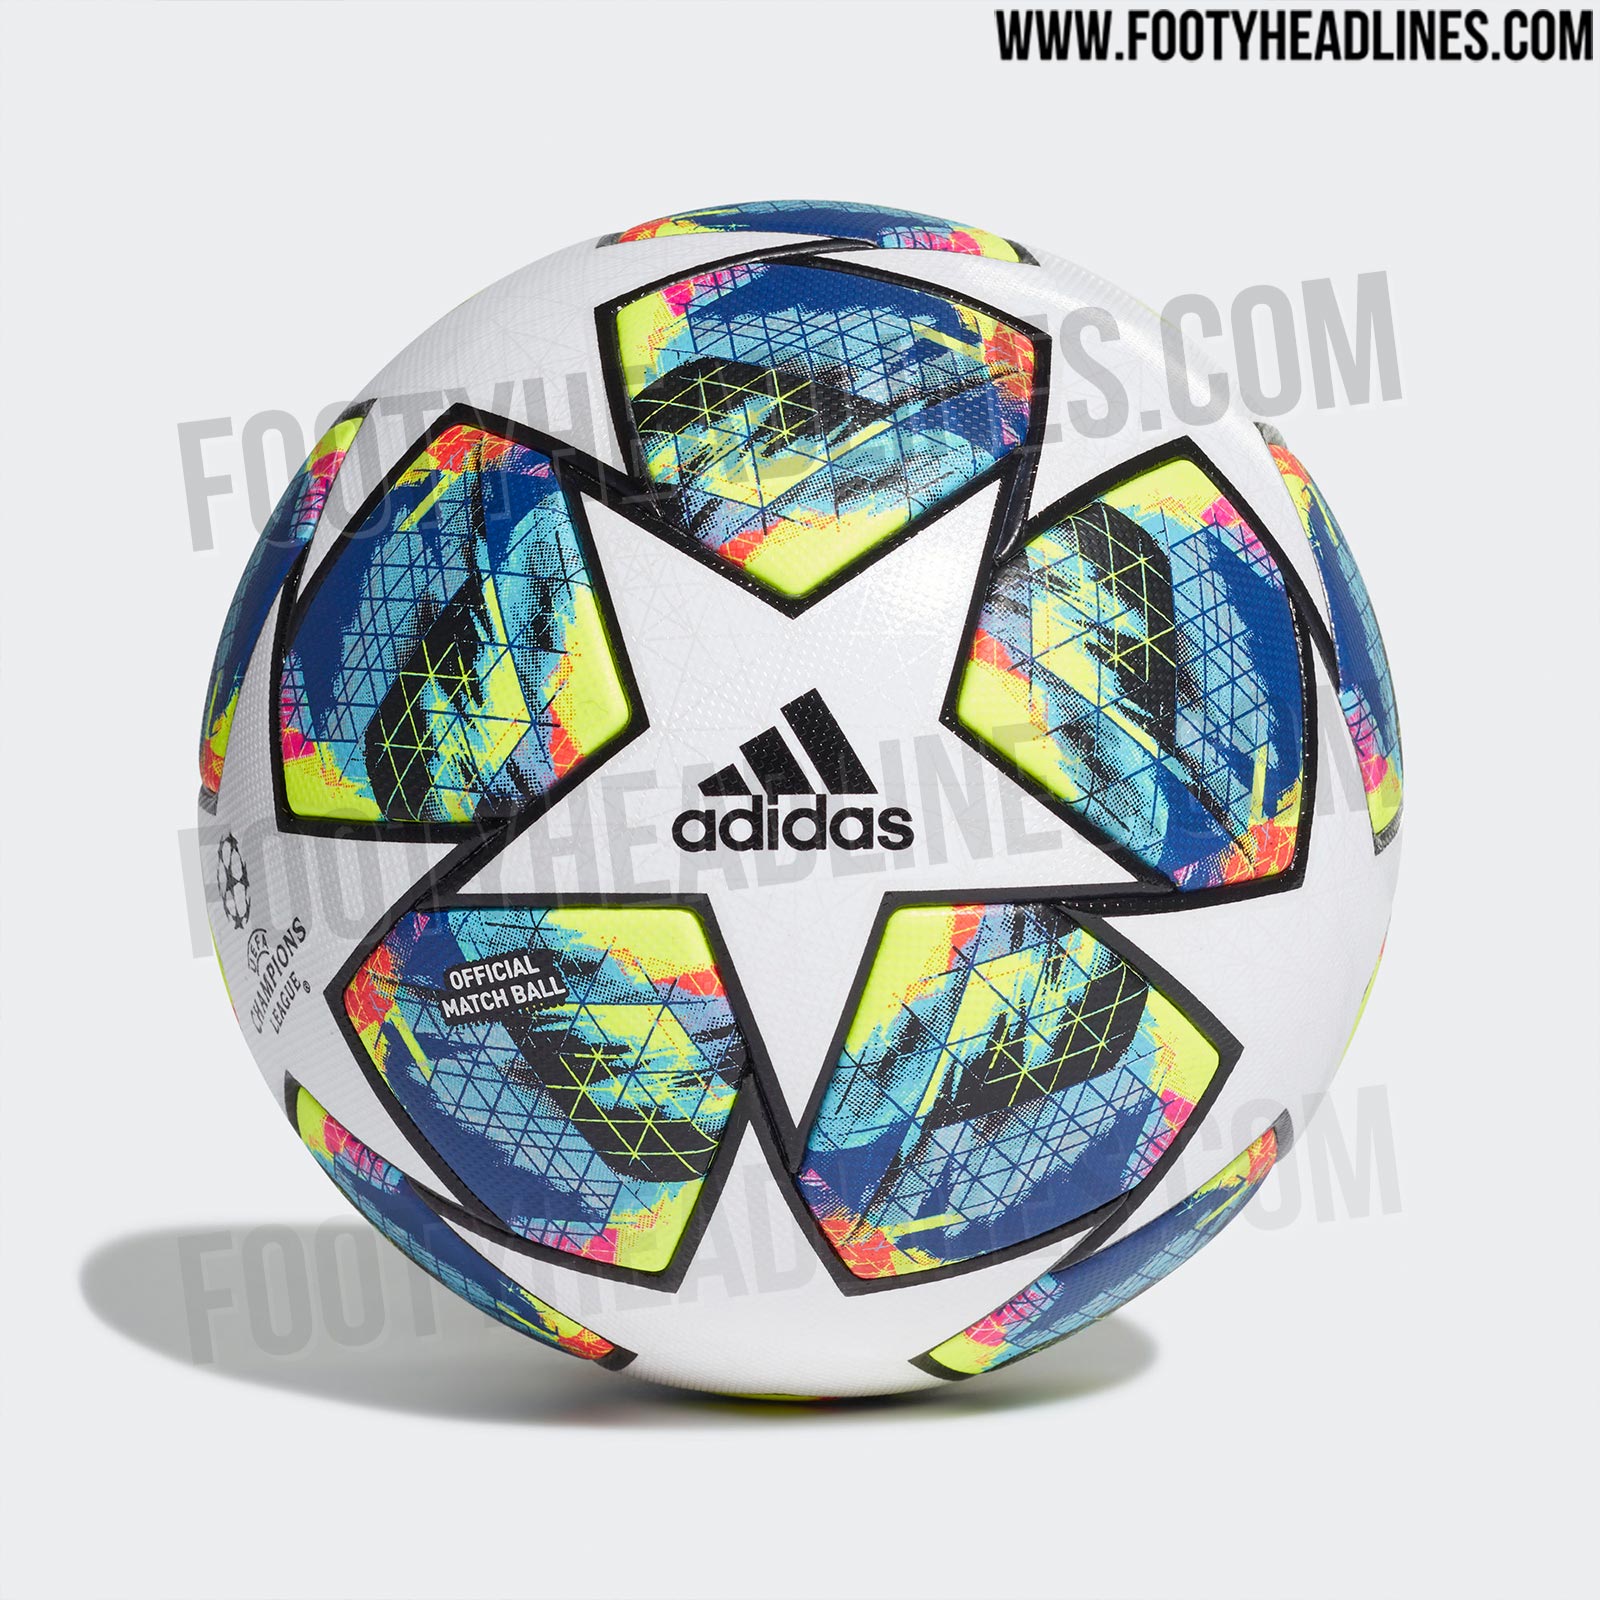 new ucl ball